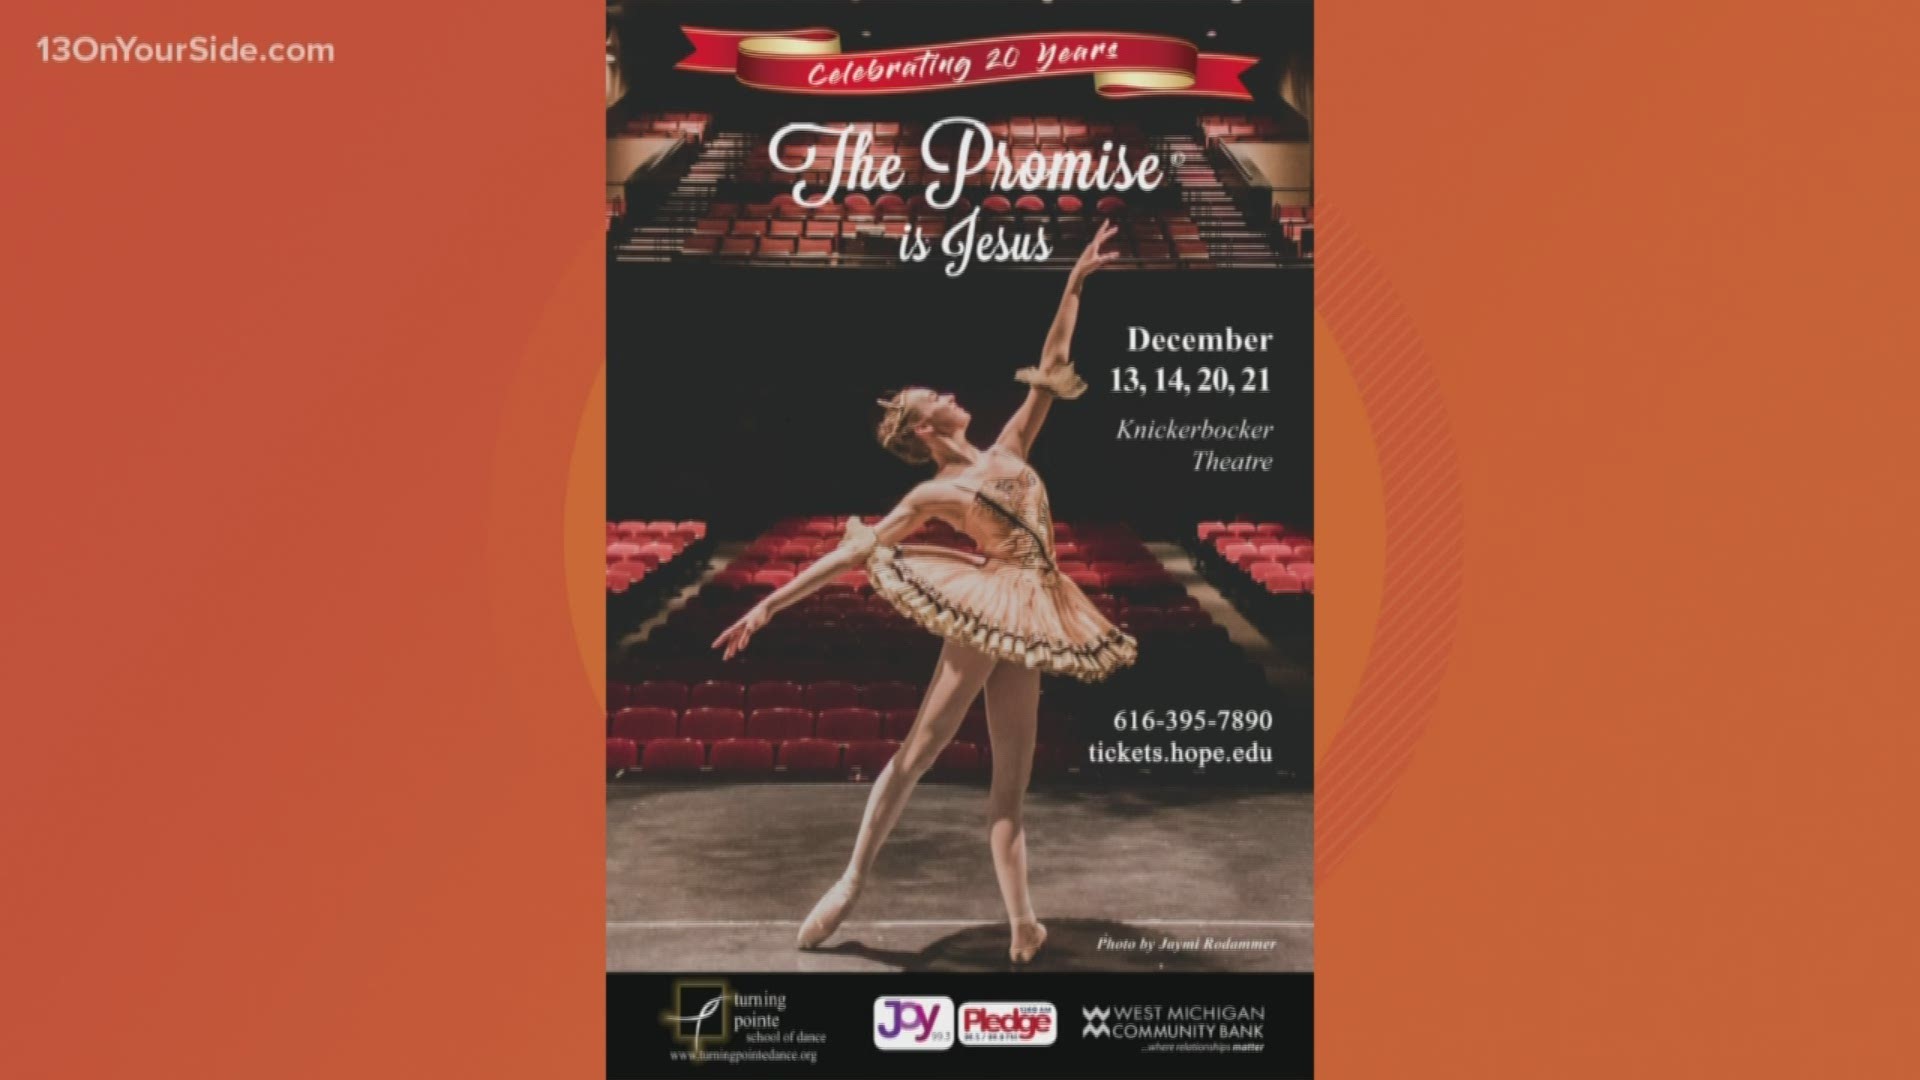 The Promise combines the story of the birth of Jesus with Classical and Contemporary Ballet. The show is being performed Dec. 13 through Dec. 21.